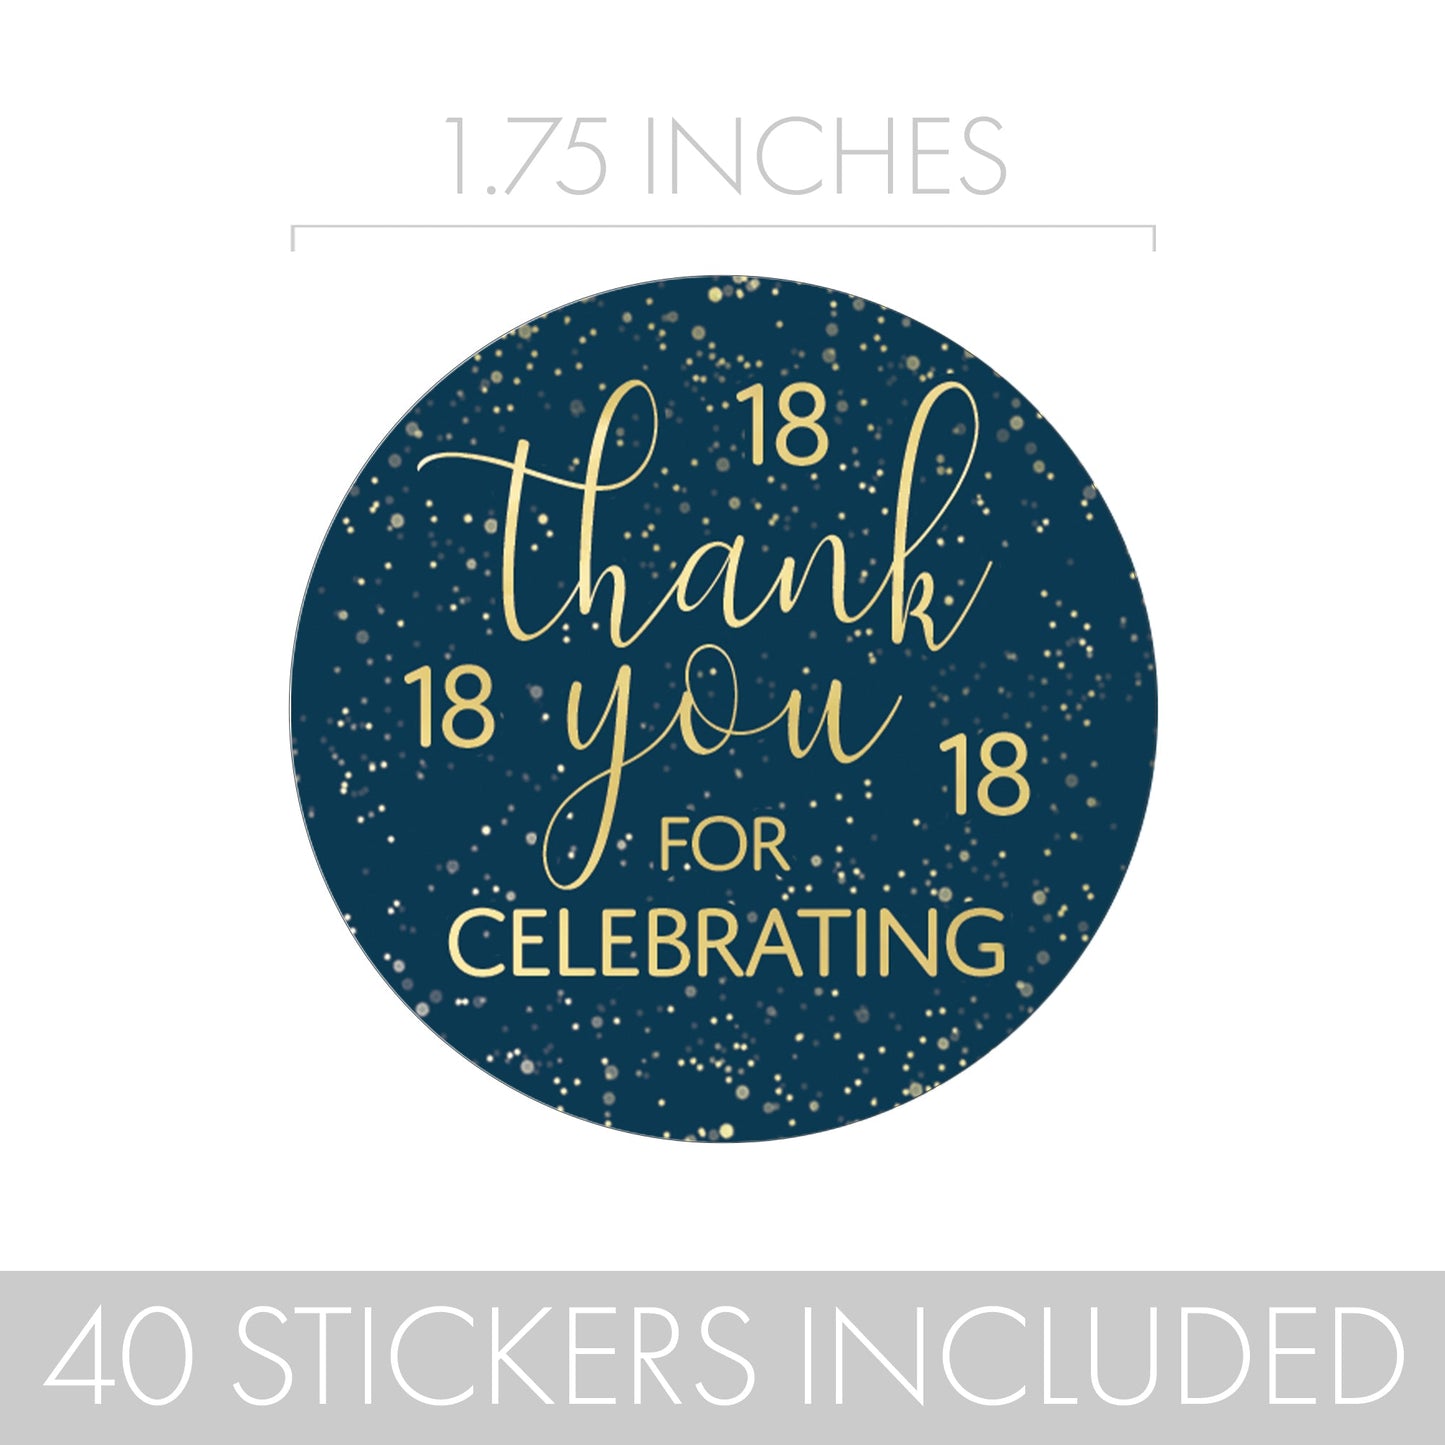 Milestone birthday thank you stickers in navy and gold